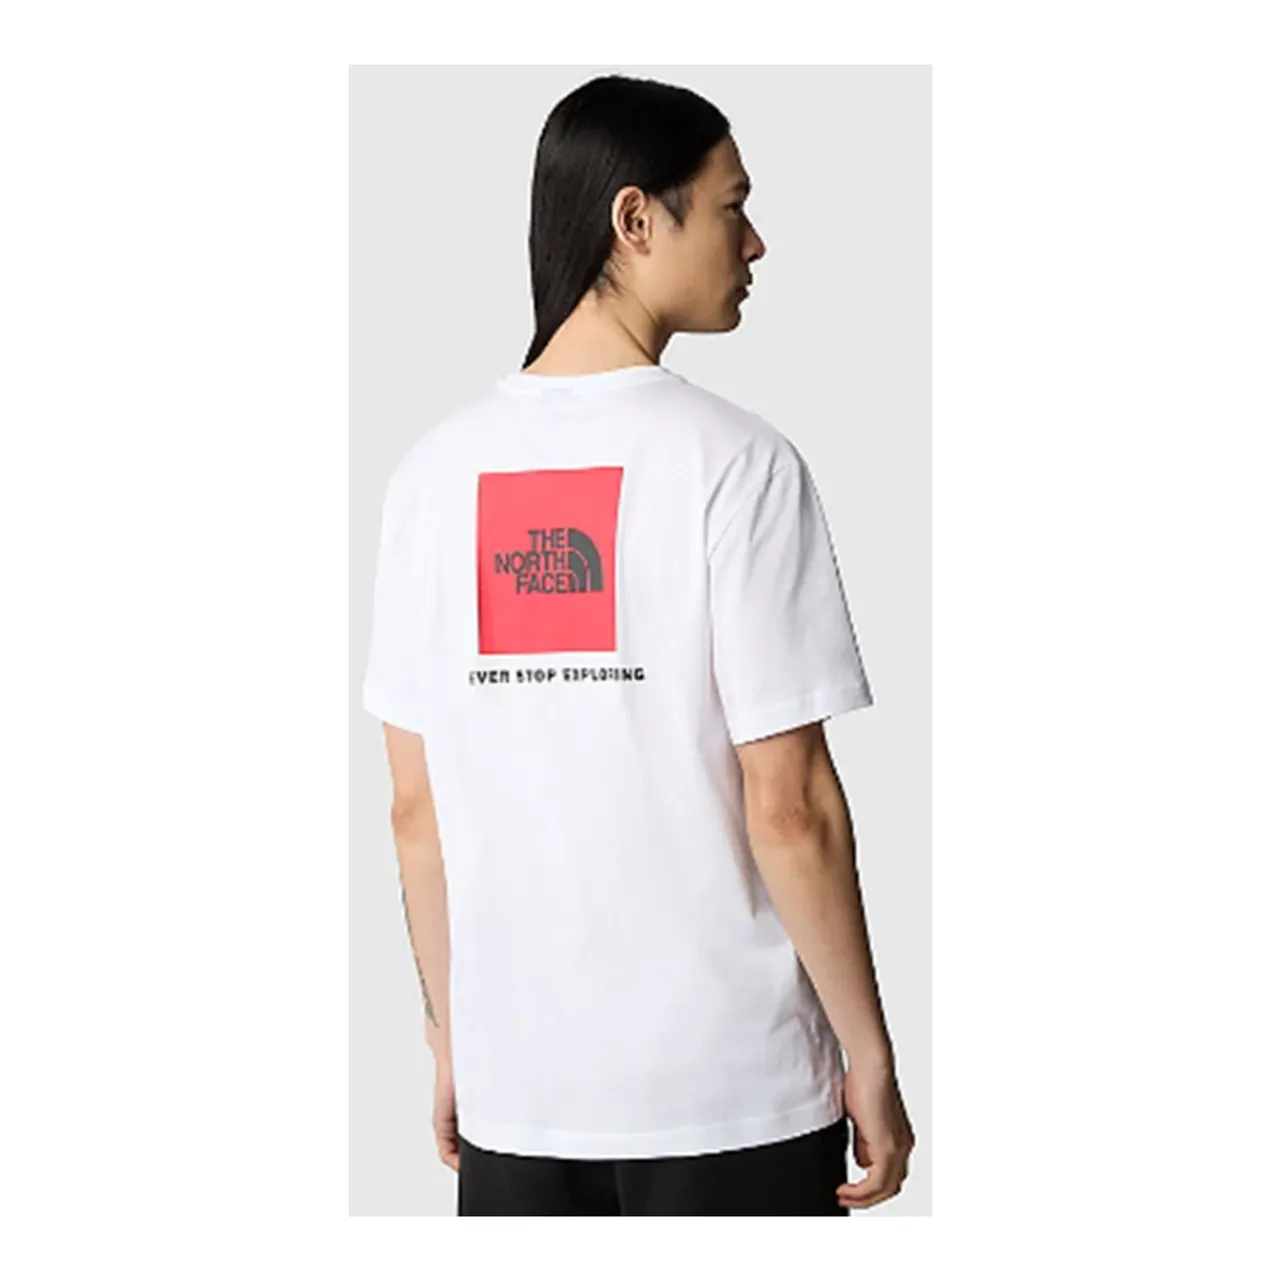 The North Face , Redbox T-Shirt White ,White male, Sizes: